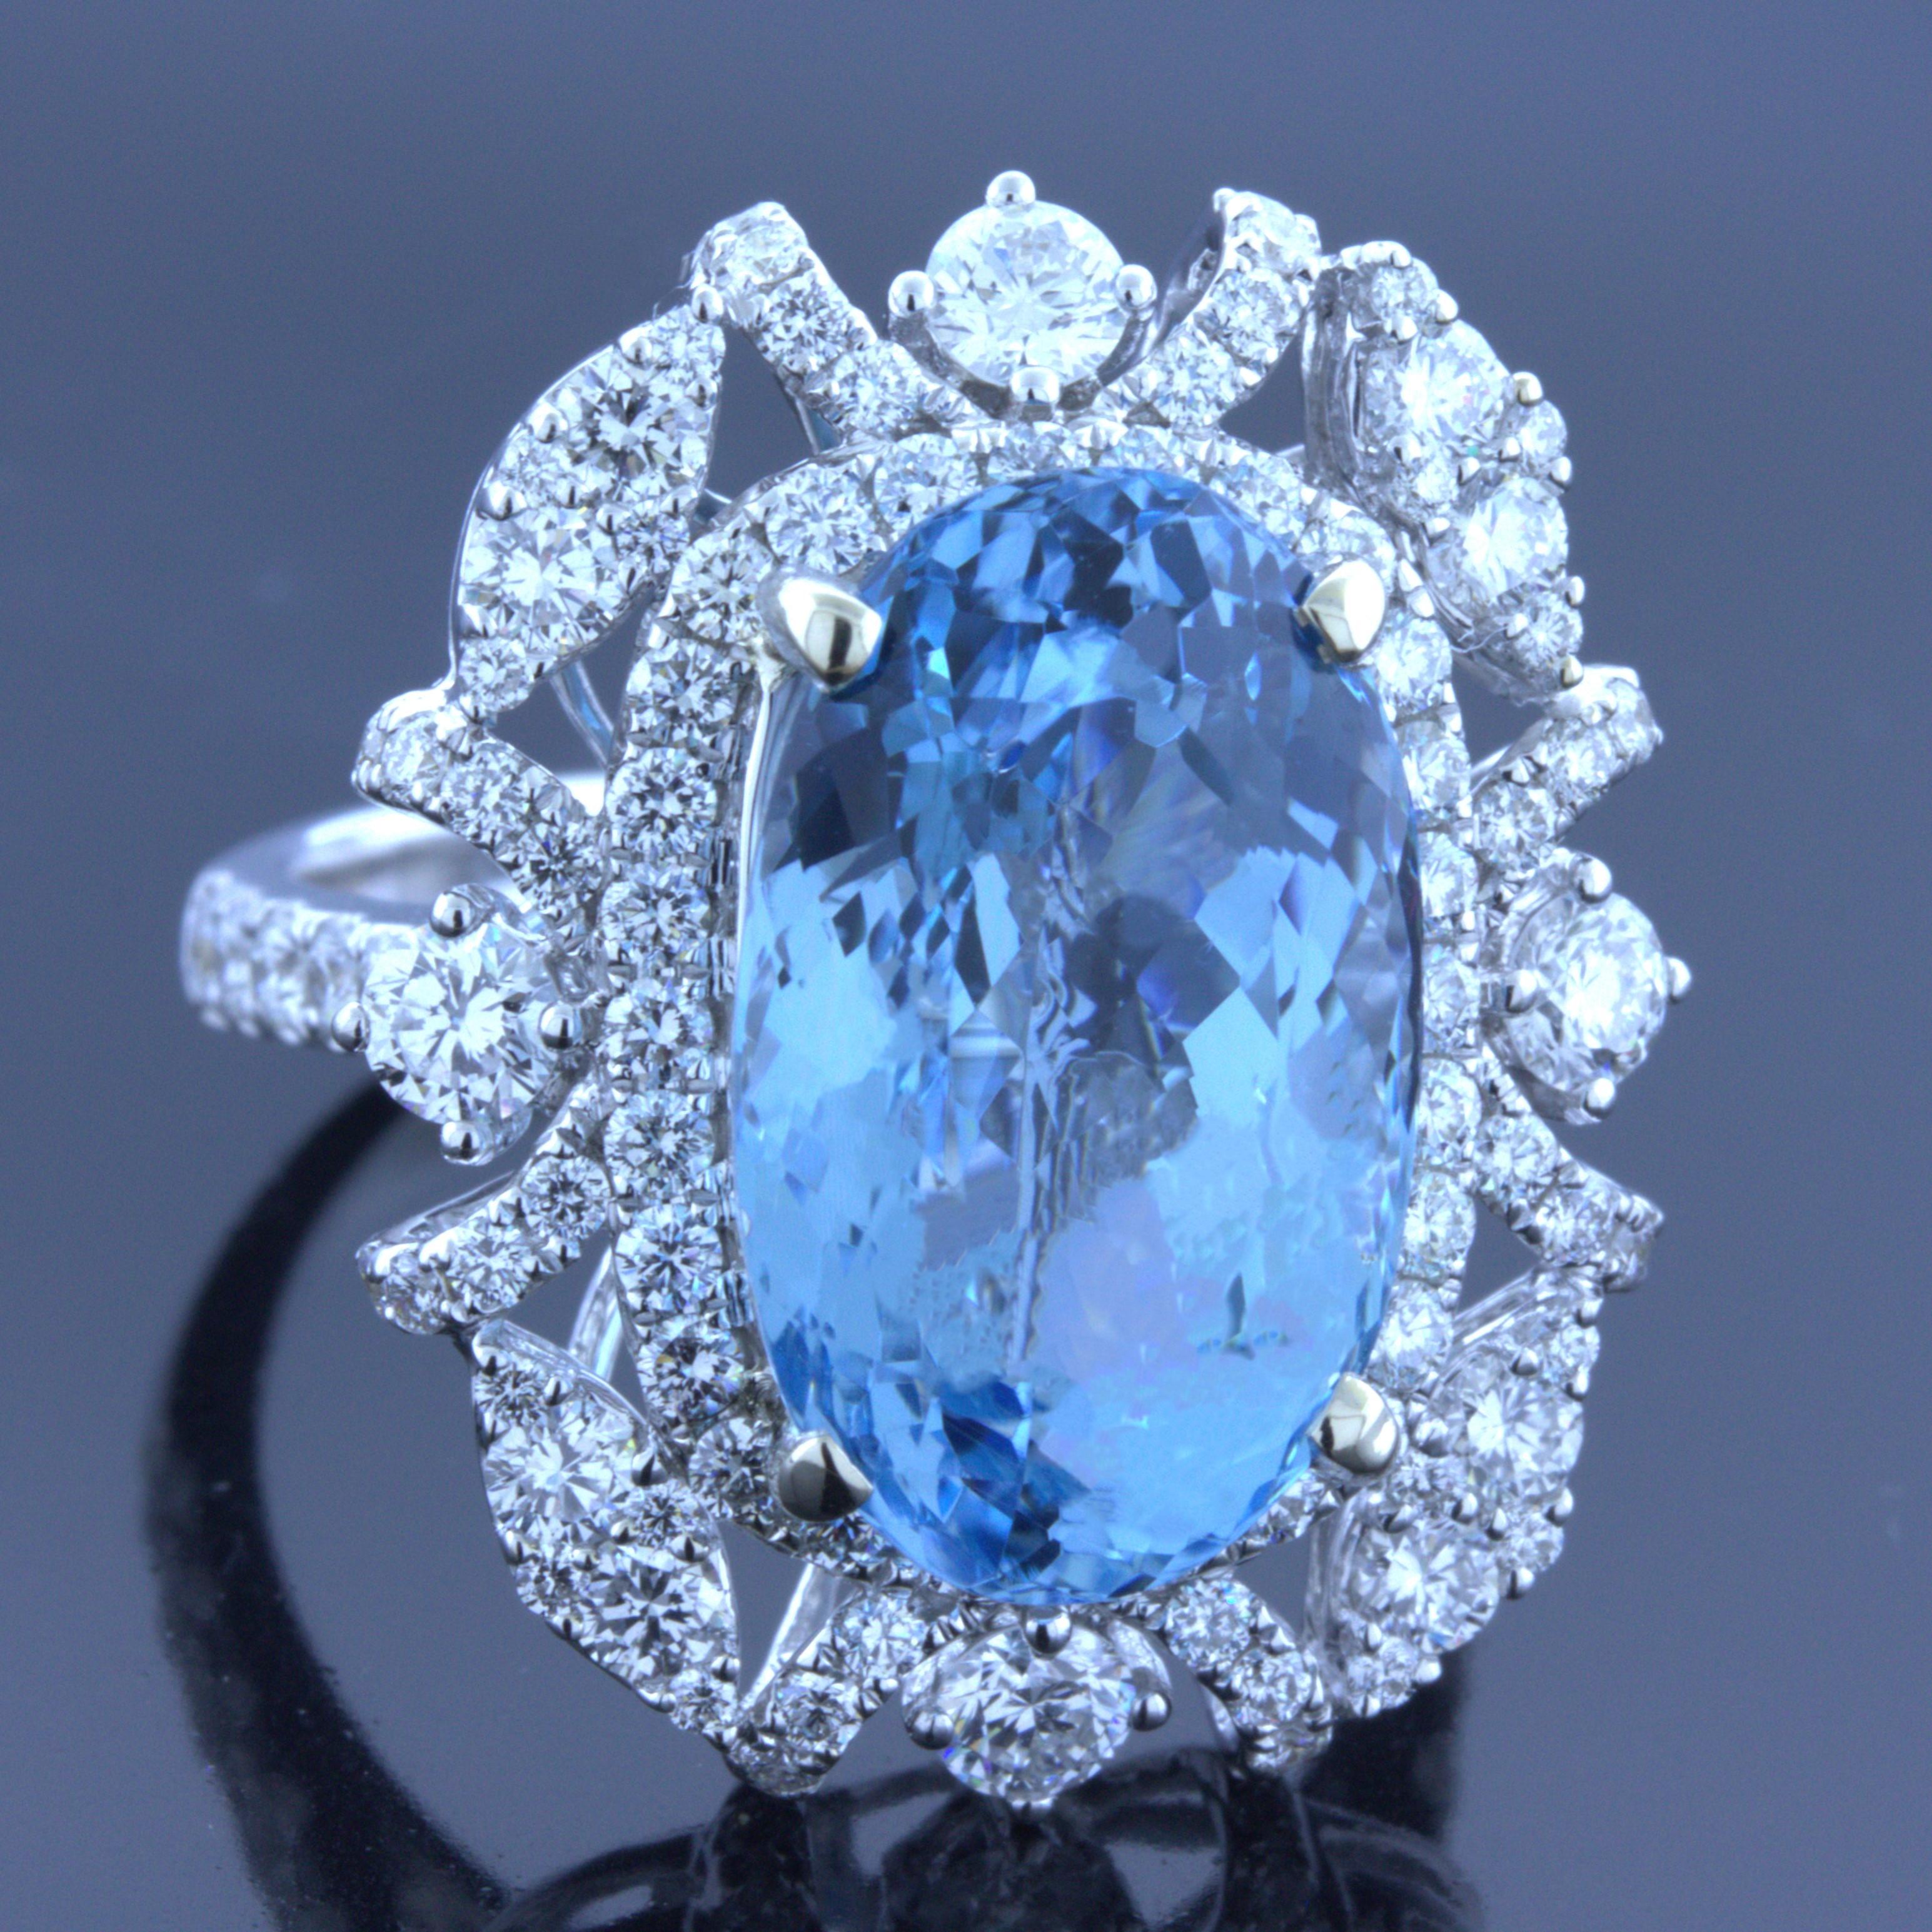 A chic and elegant ring featuring a very fine aquamarine. The oval-shape aqua weighs 8.04 carats and has a rich vibrant sea-blue color. Adding to that, the stone is completely clean and free of inclusions allowing the stone to shine. It is